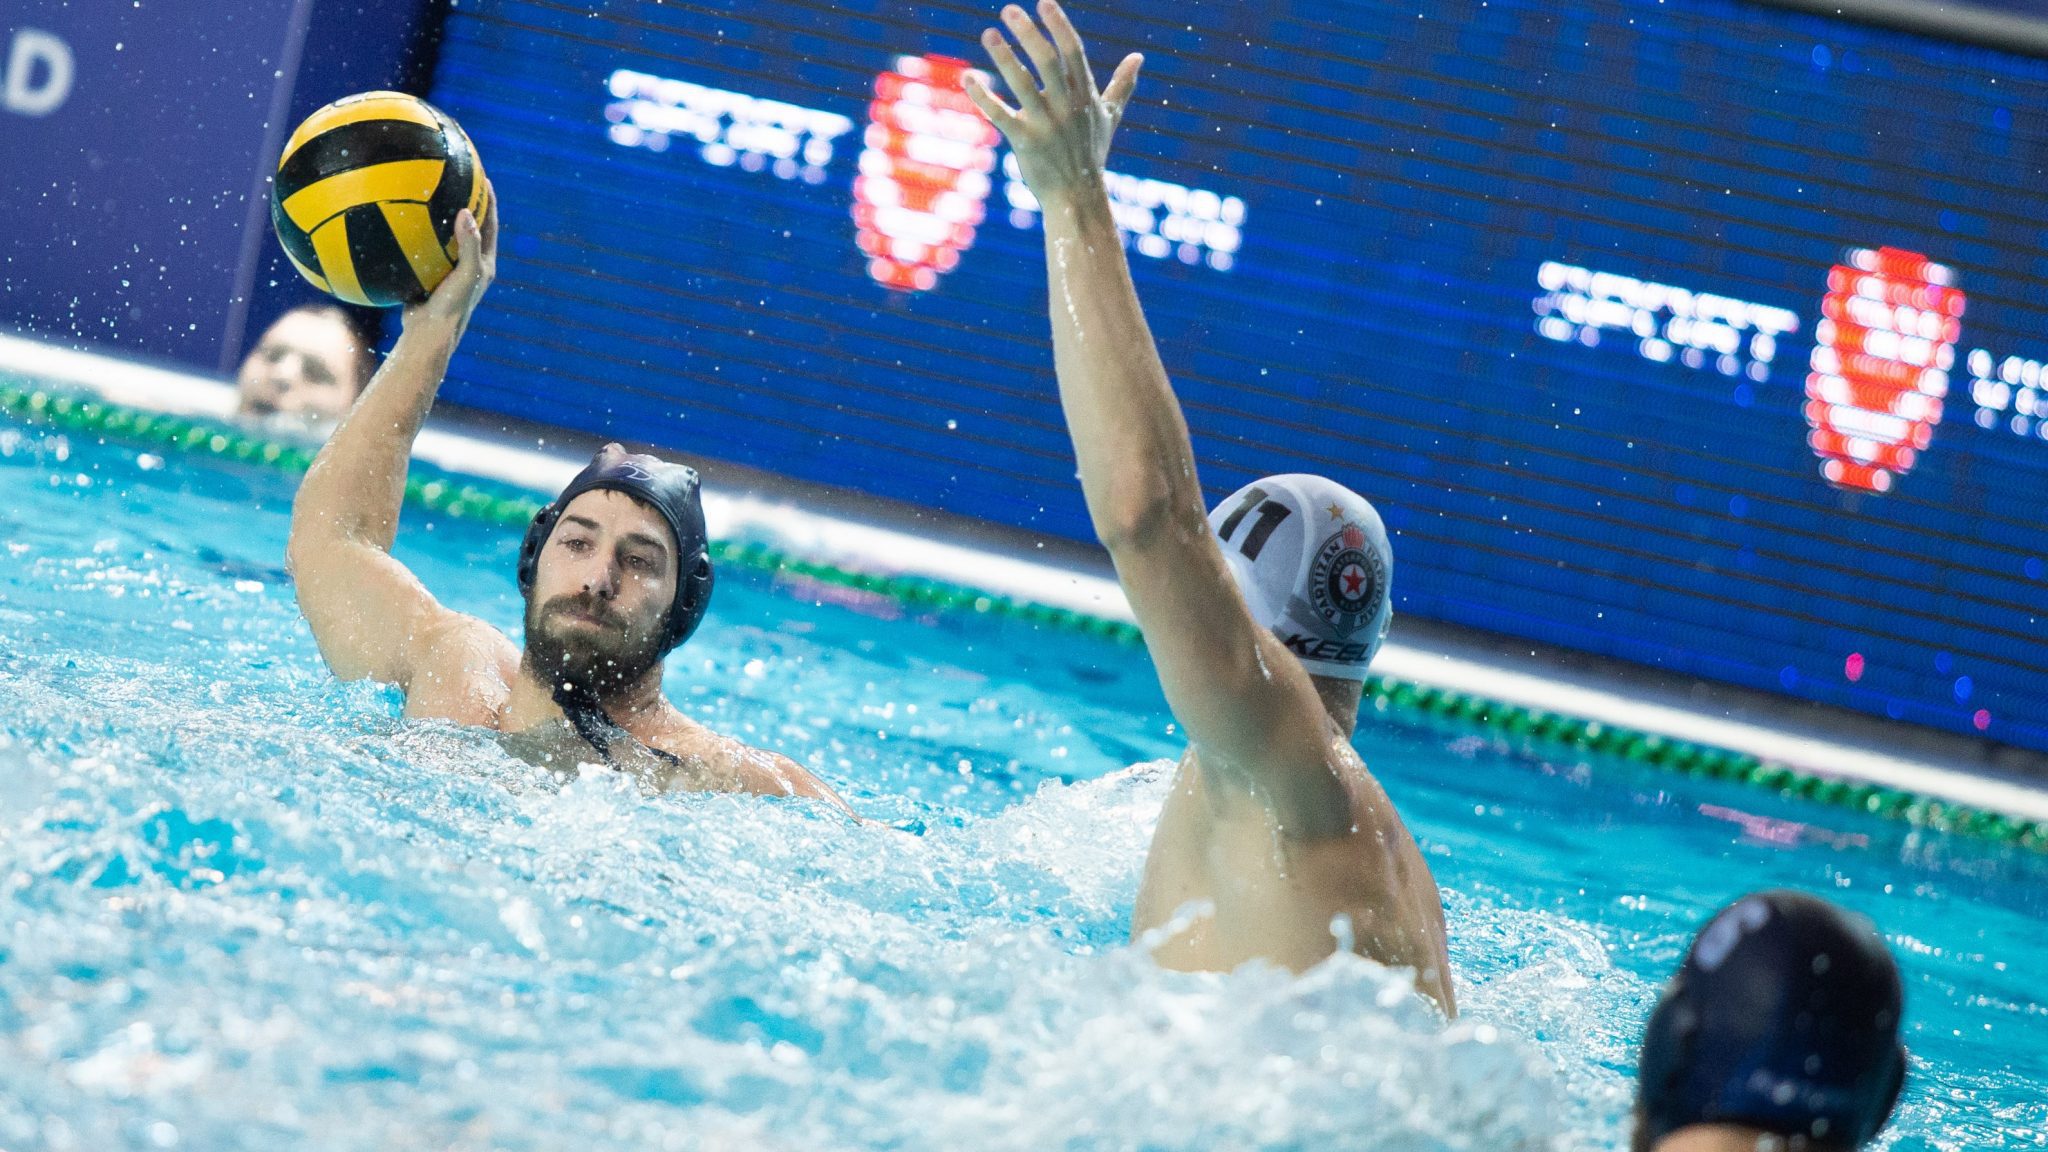 KVK Radnicki from Kragujevac clinches Serbian Cup - Total Waterpolo